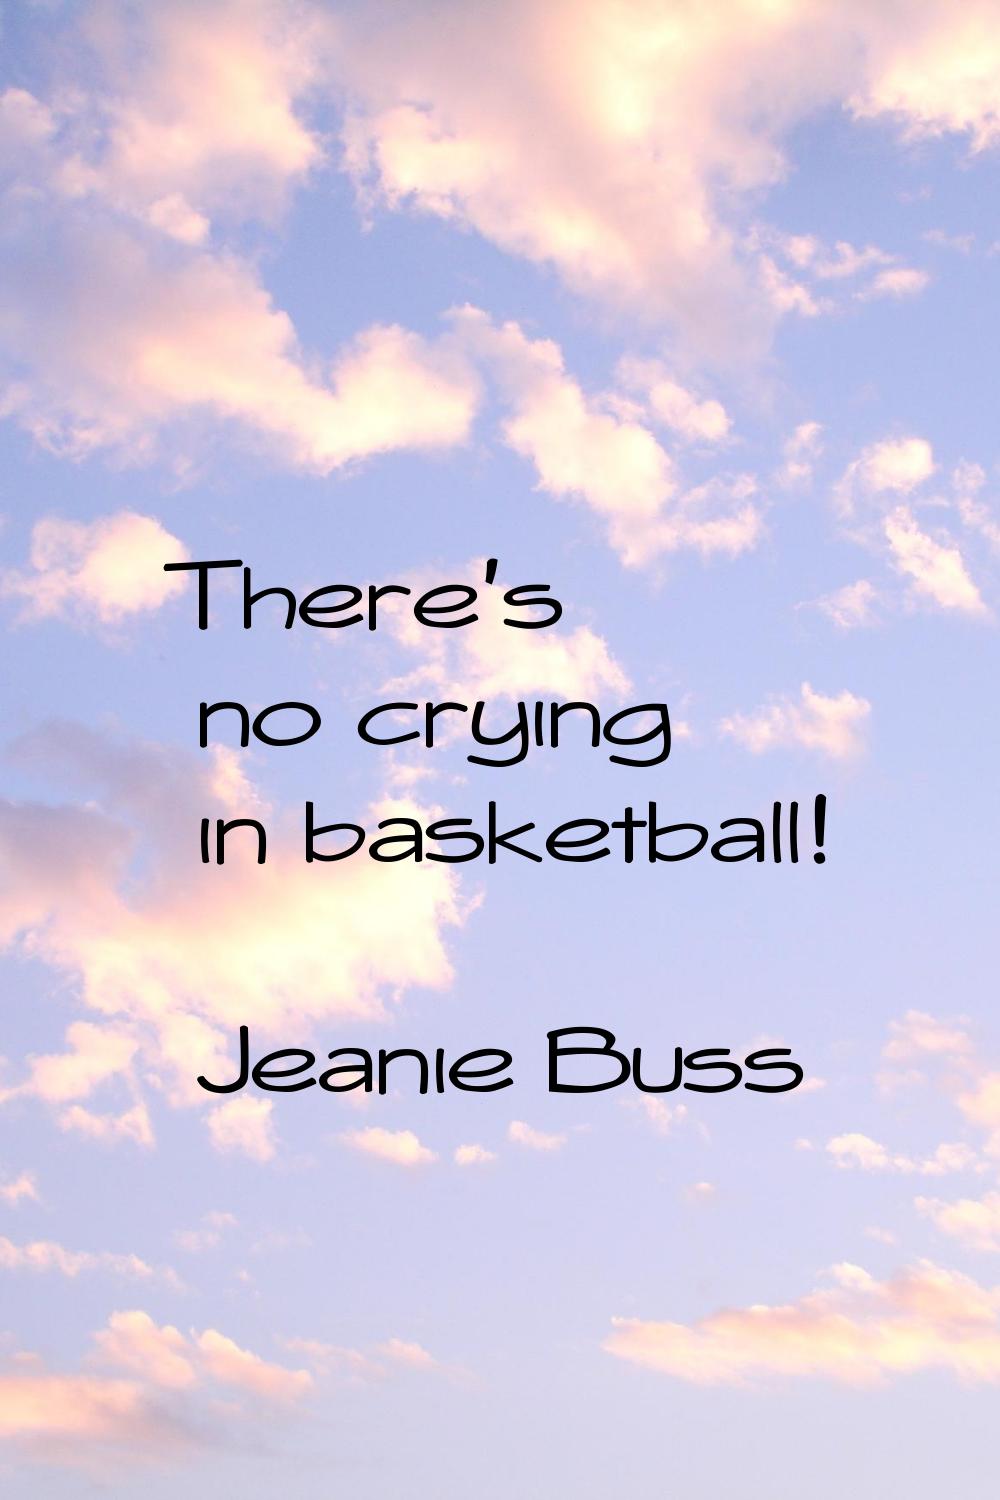 There's no crying in basketball!